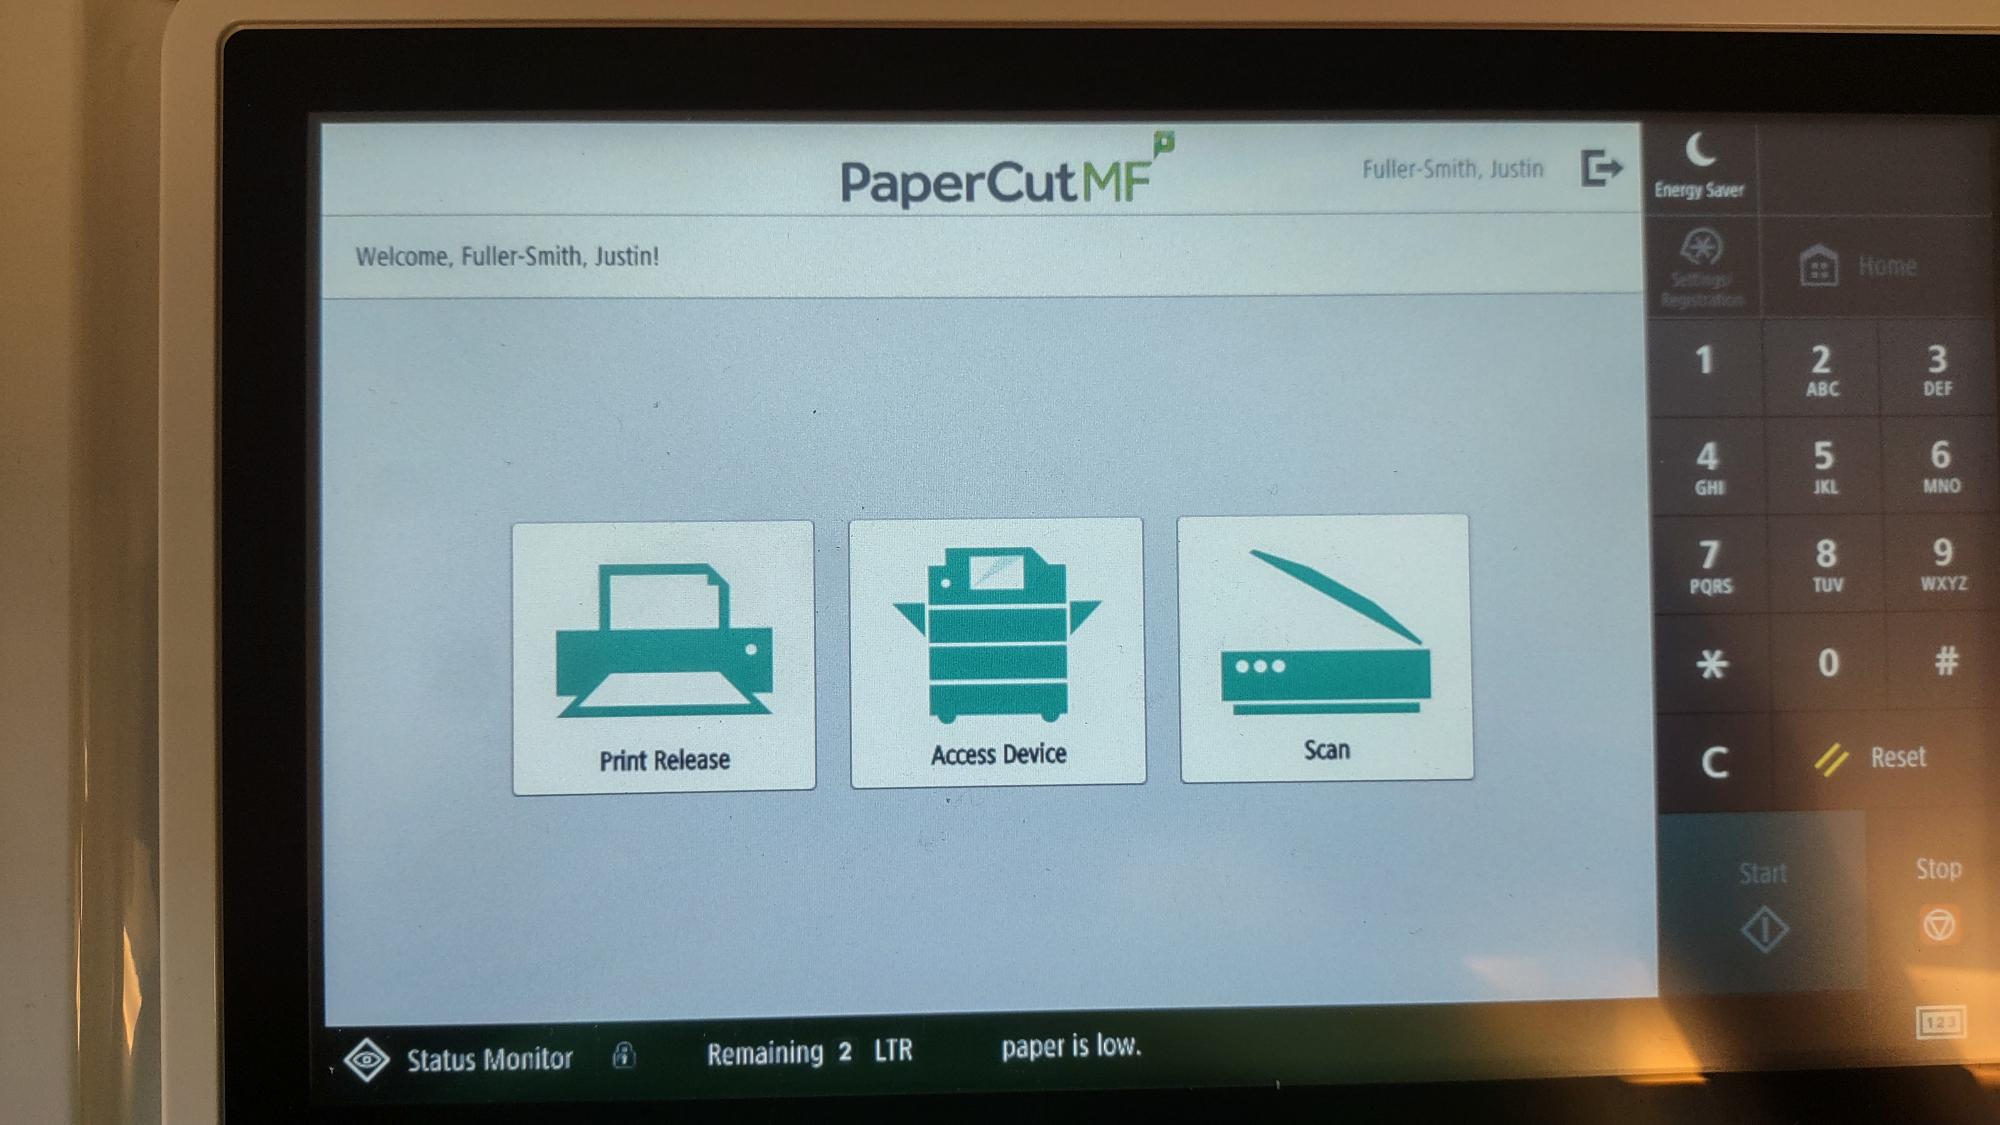 Image of the printer's touchscreen display. Three prominent buttons appear. From left to right, they are: "Print Release," "Access Device," and "Scan."